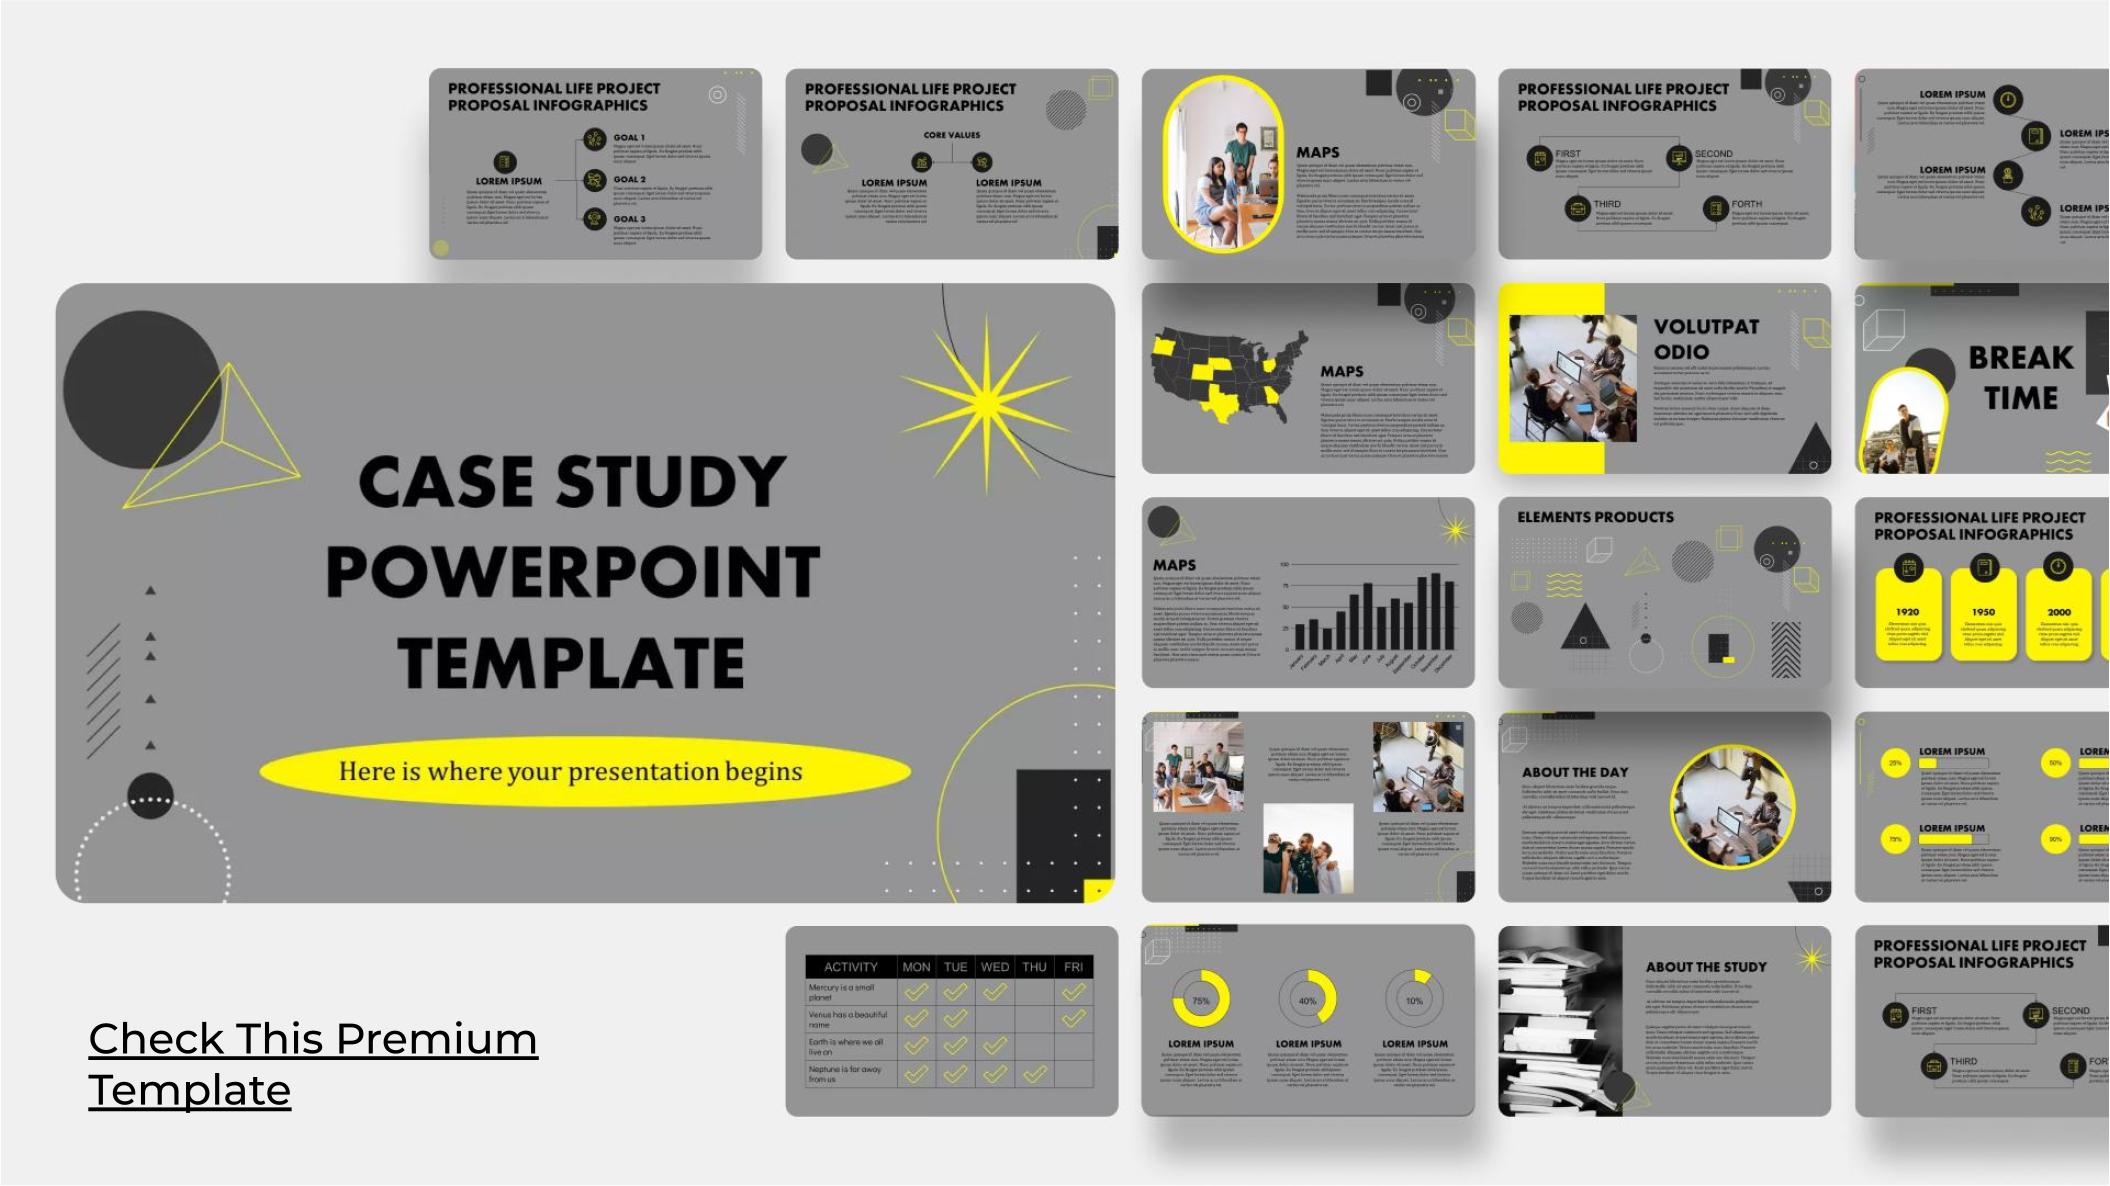 4 case study powerpoint template.pptx 969